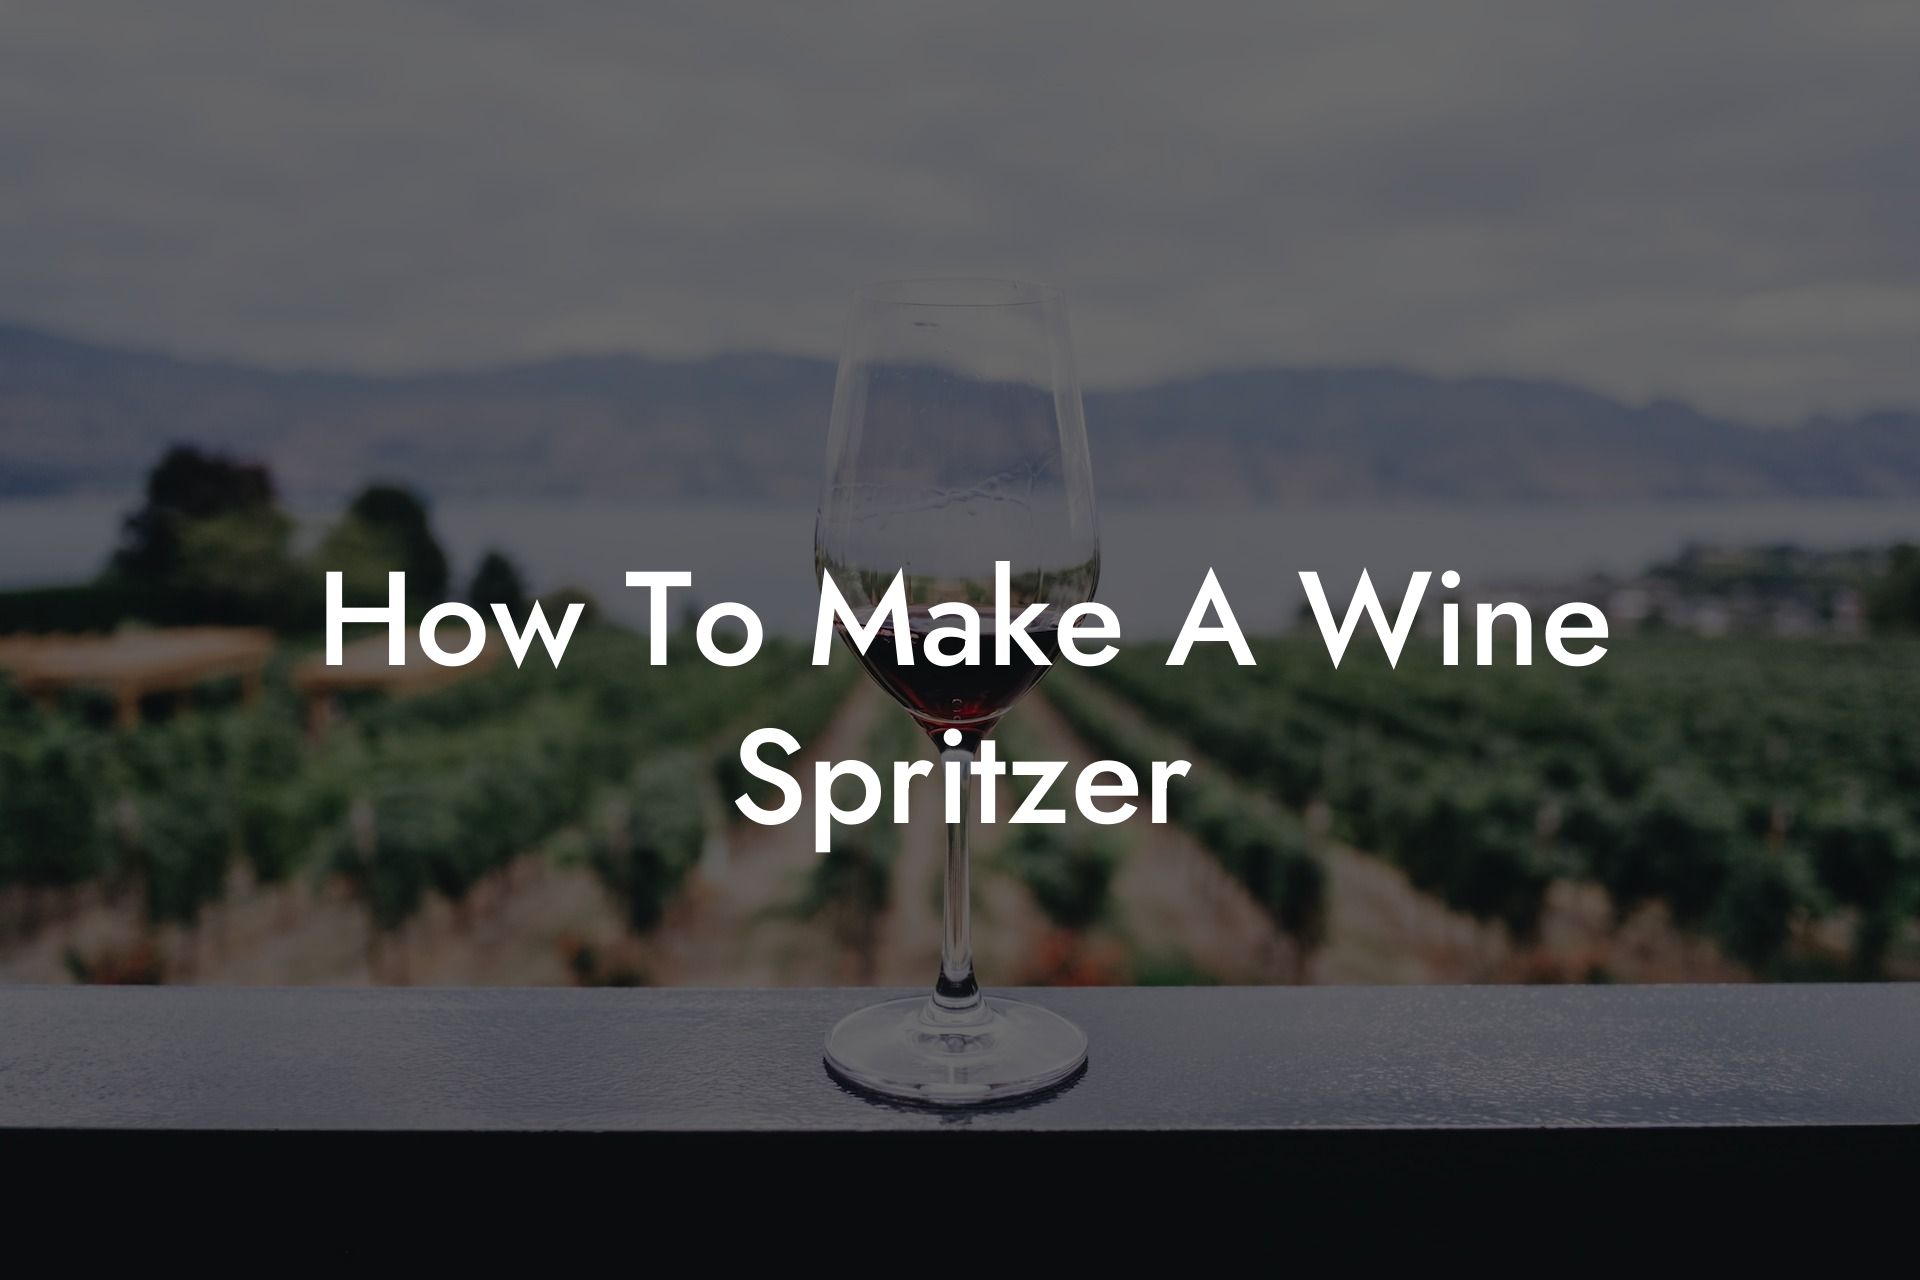 How To Make A Wine Spritzer